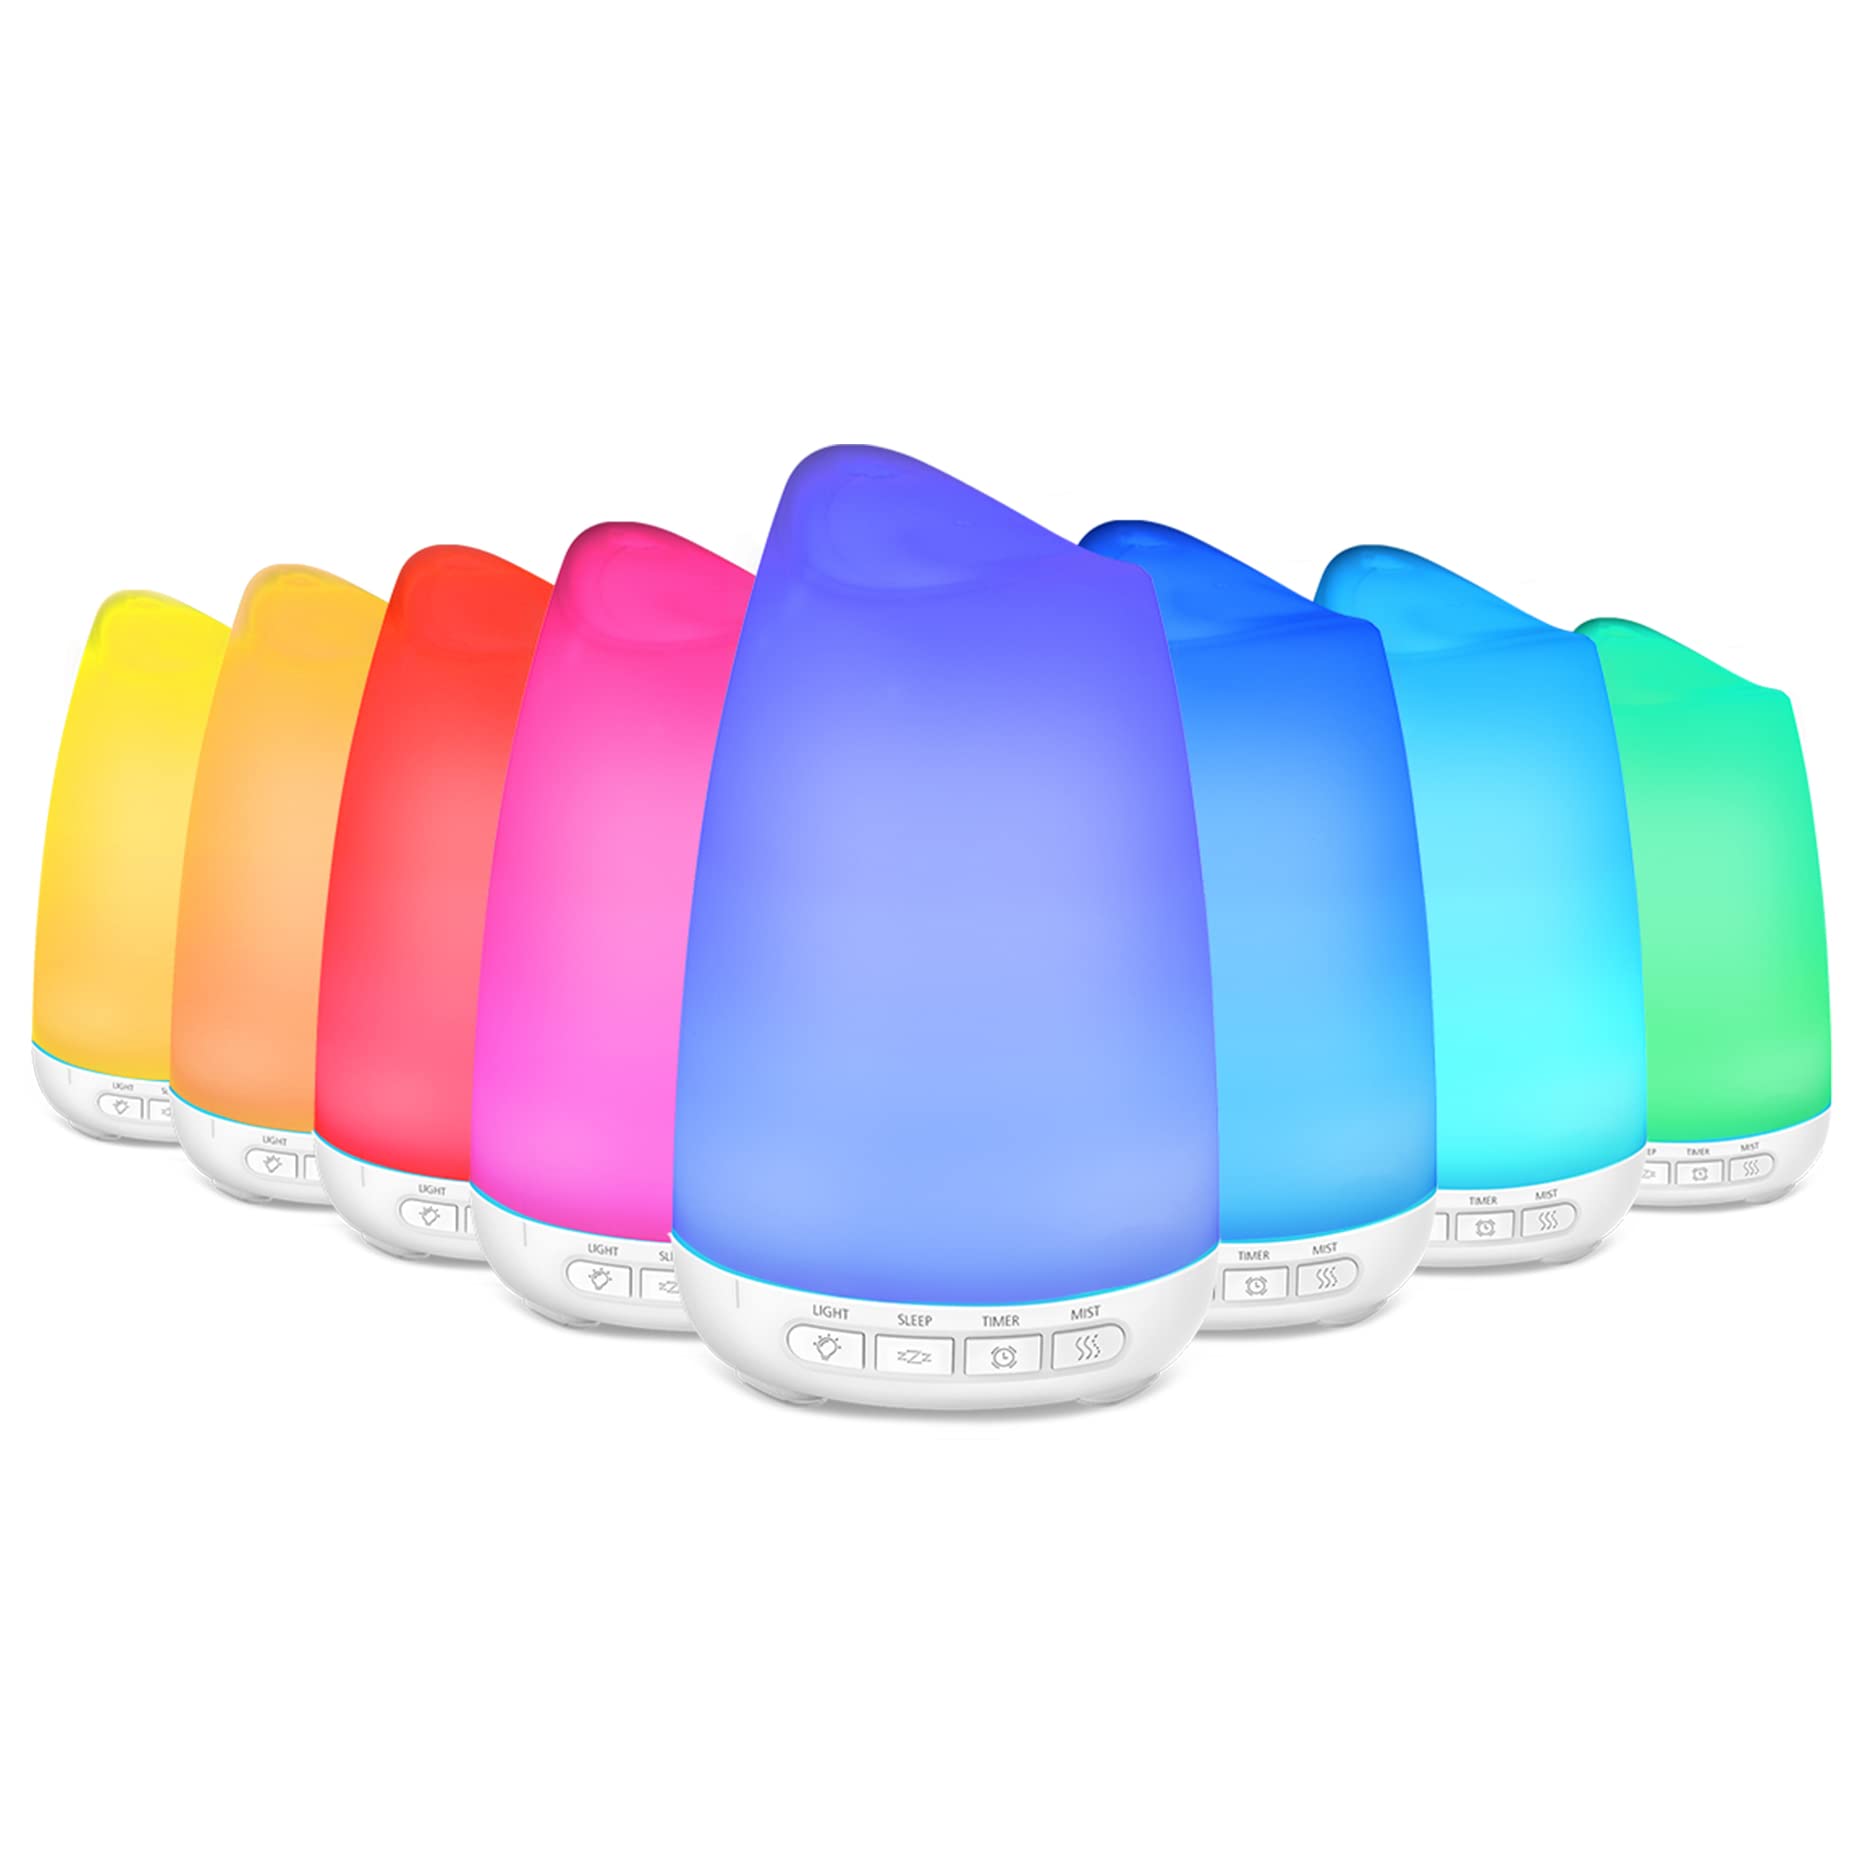 ZubuFitd 150ml Essential Oil Diffusers, Aromatherapy Diffusers with 8 Colorful LED Lights, 21dB Silent Sleep Mode, BPA-Free, Waterless Auto Shut-off Diffuser Humidifiers for Bedroom, Home (White)